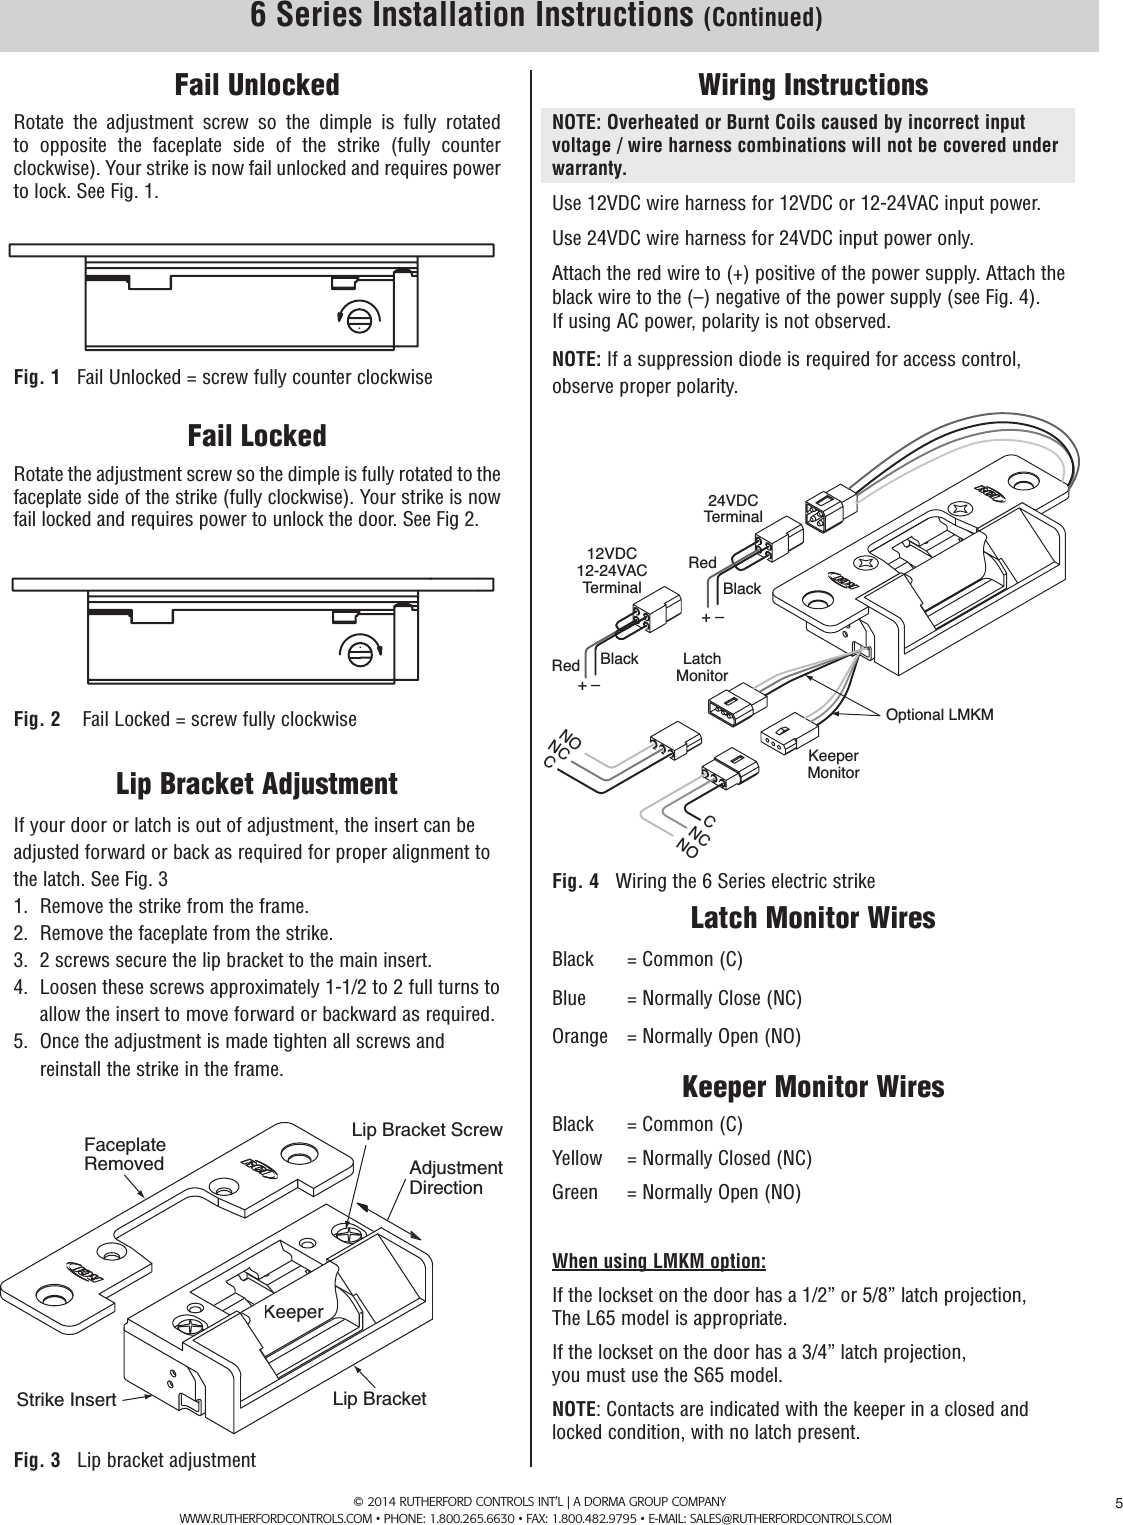 Page 5 of 6 - RCI  6 Series/7 Series Installation Instructions IS6A R0614